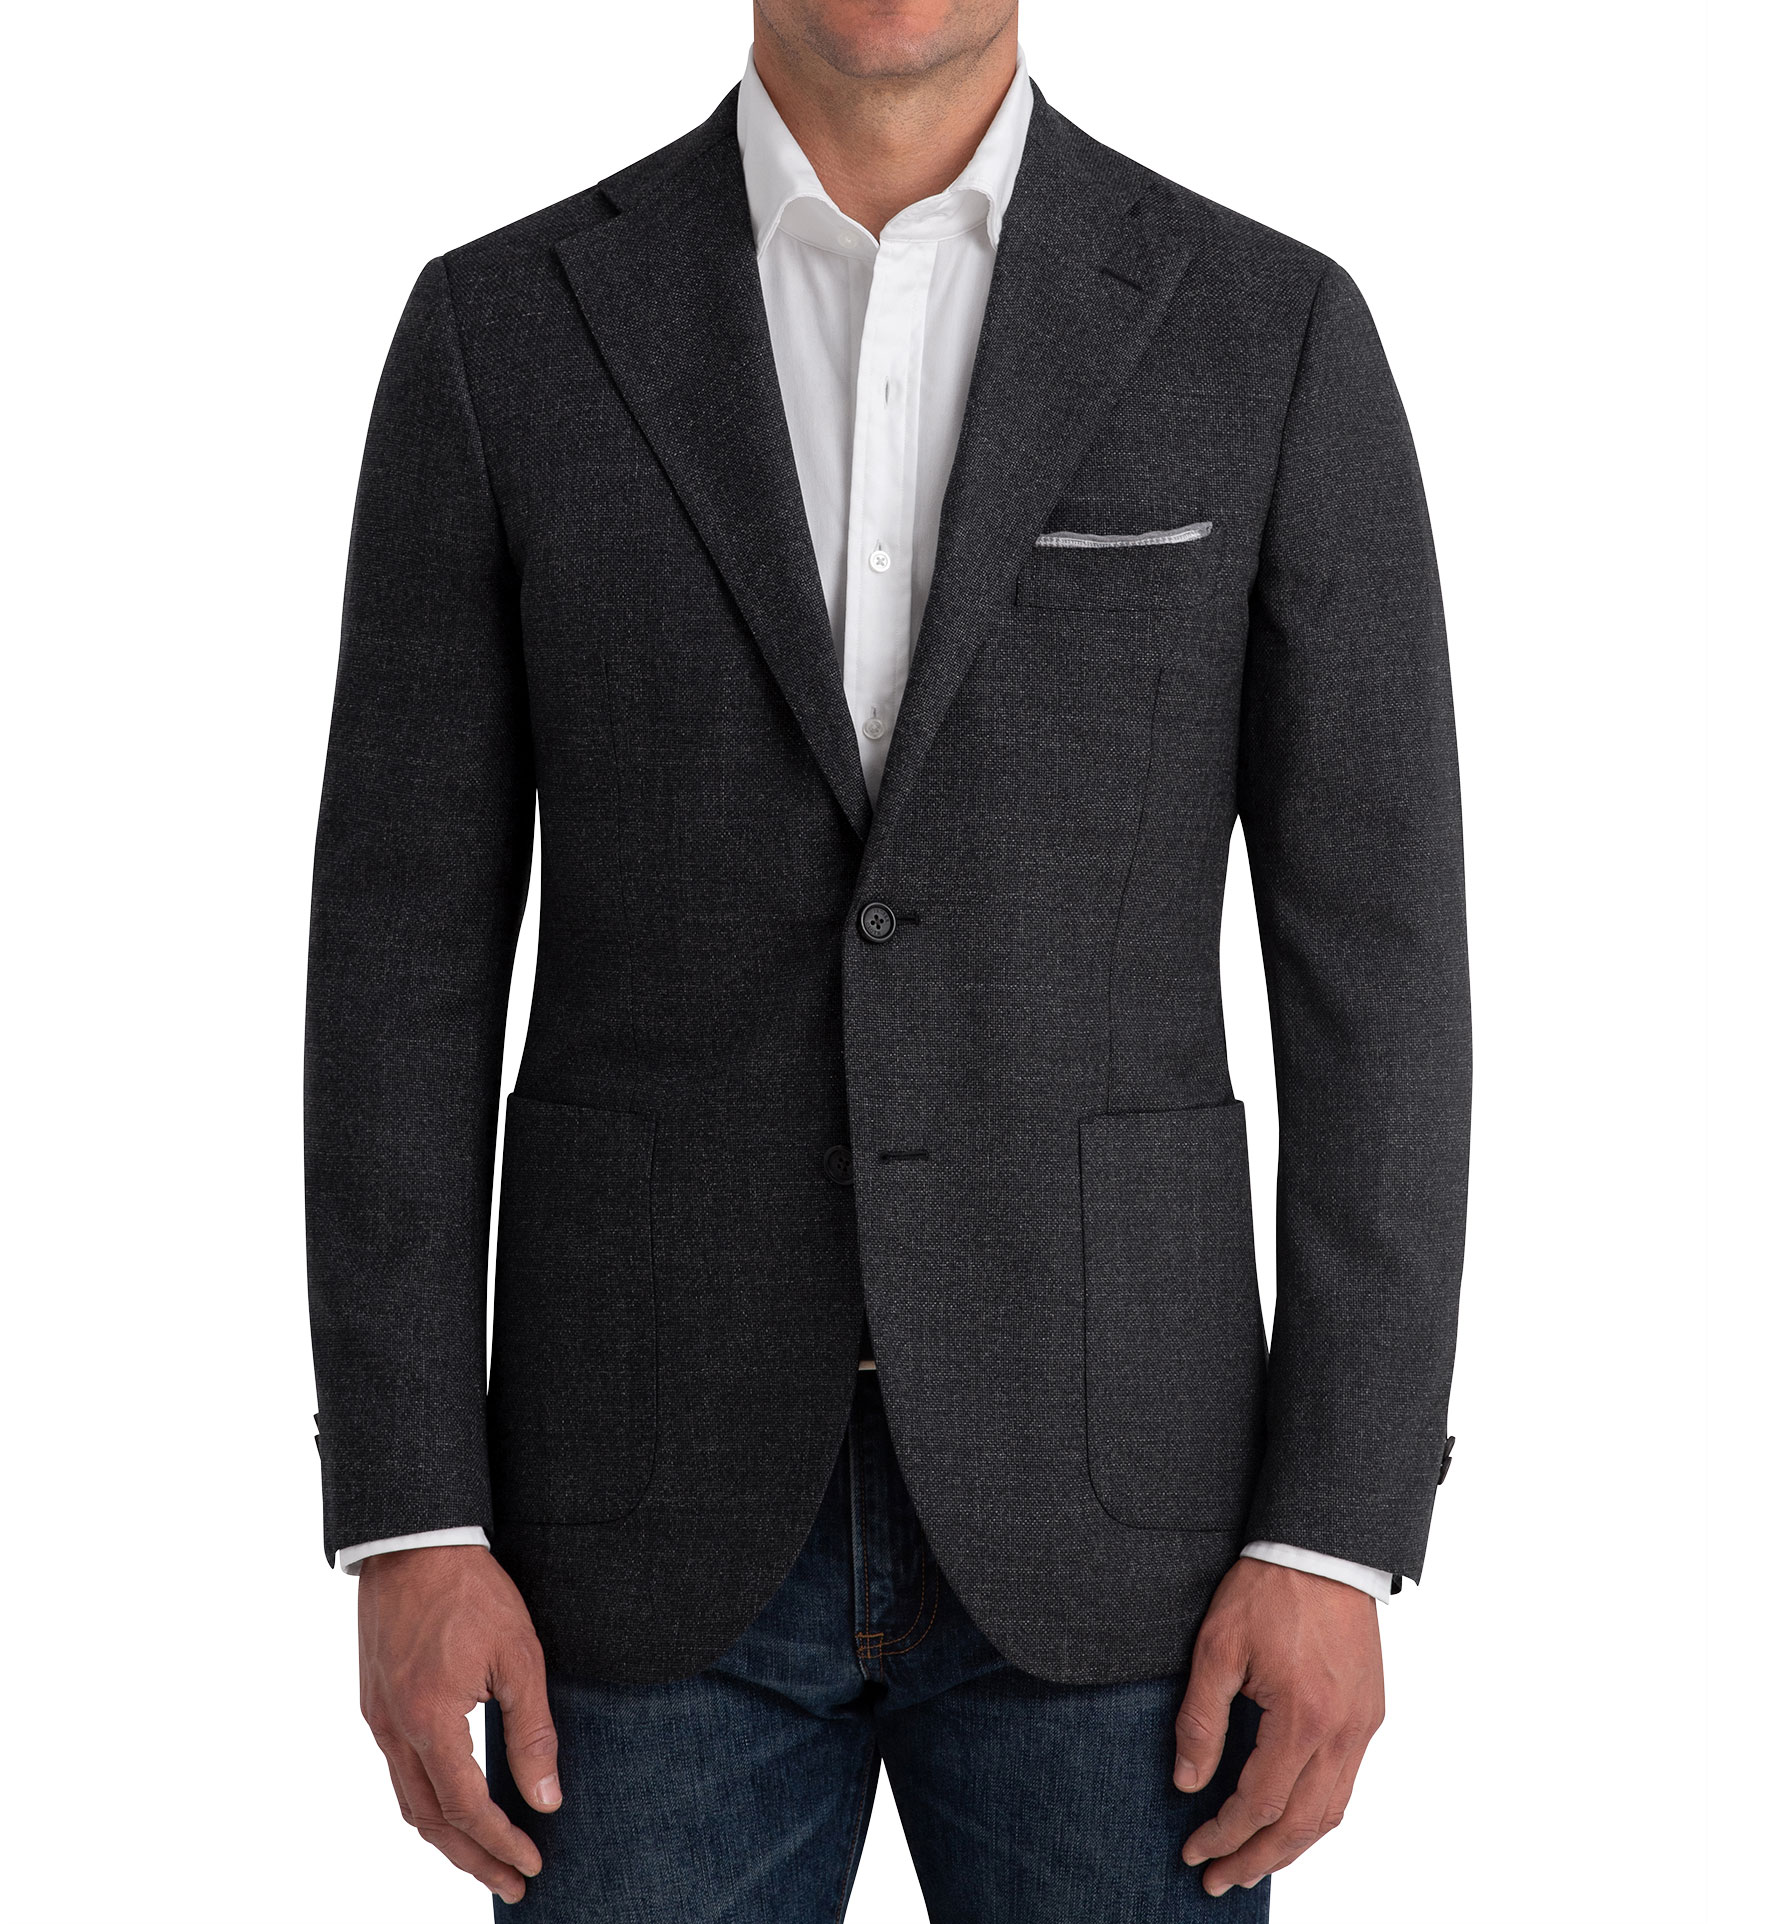 Bedford Charcoal Wool Hopsack Jacket - Custom Fit Tailored Clothing